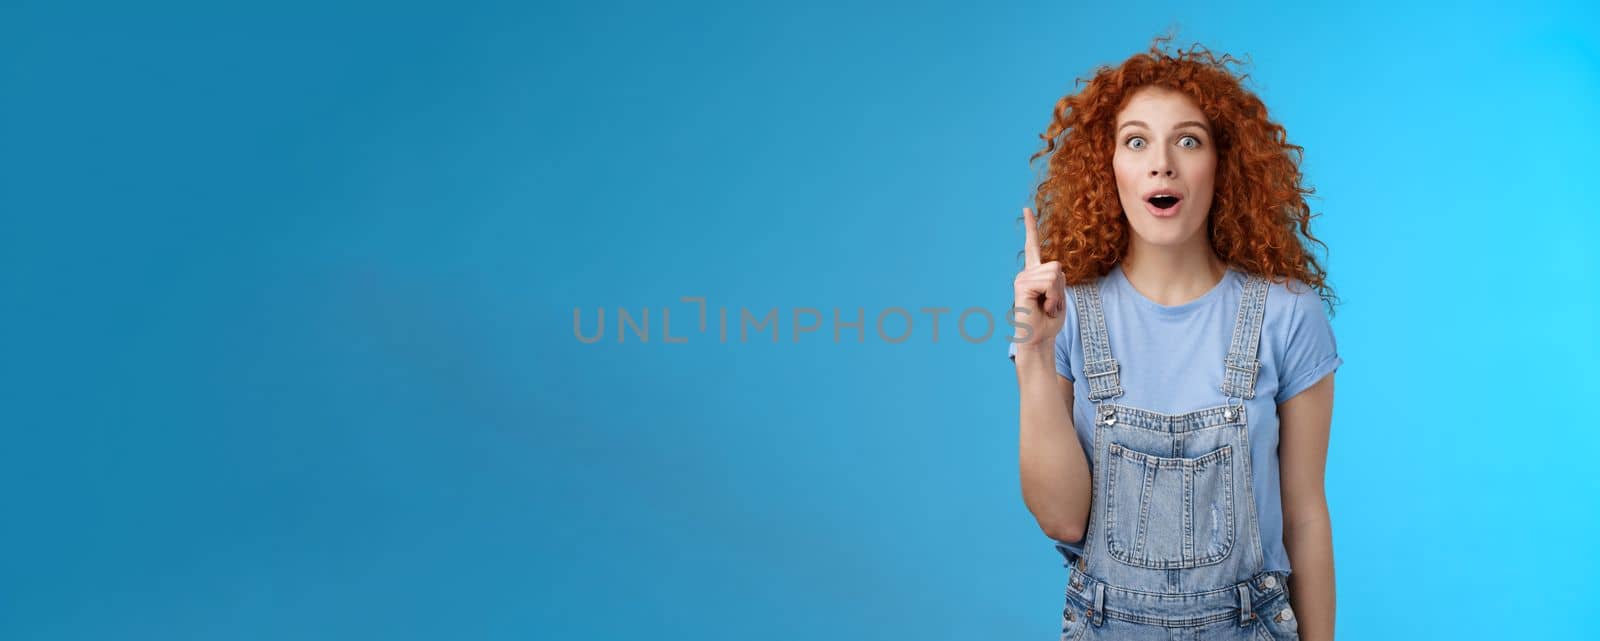 Lifestyle. Impressed excited cute redhead curly female european student wear denim overalls t-shirt open mouth sensitive talking about amazing promo offer pointing up index finger smiling inspired.